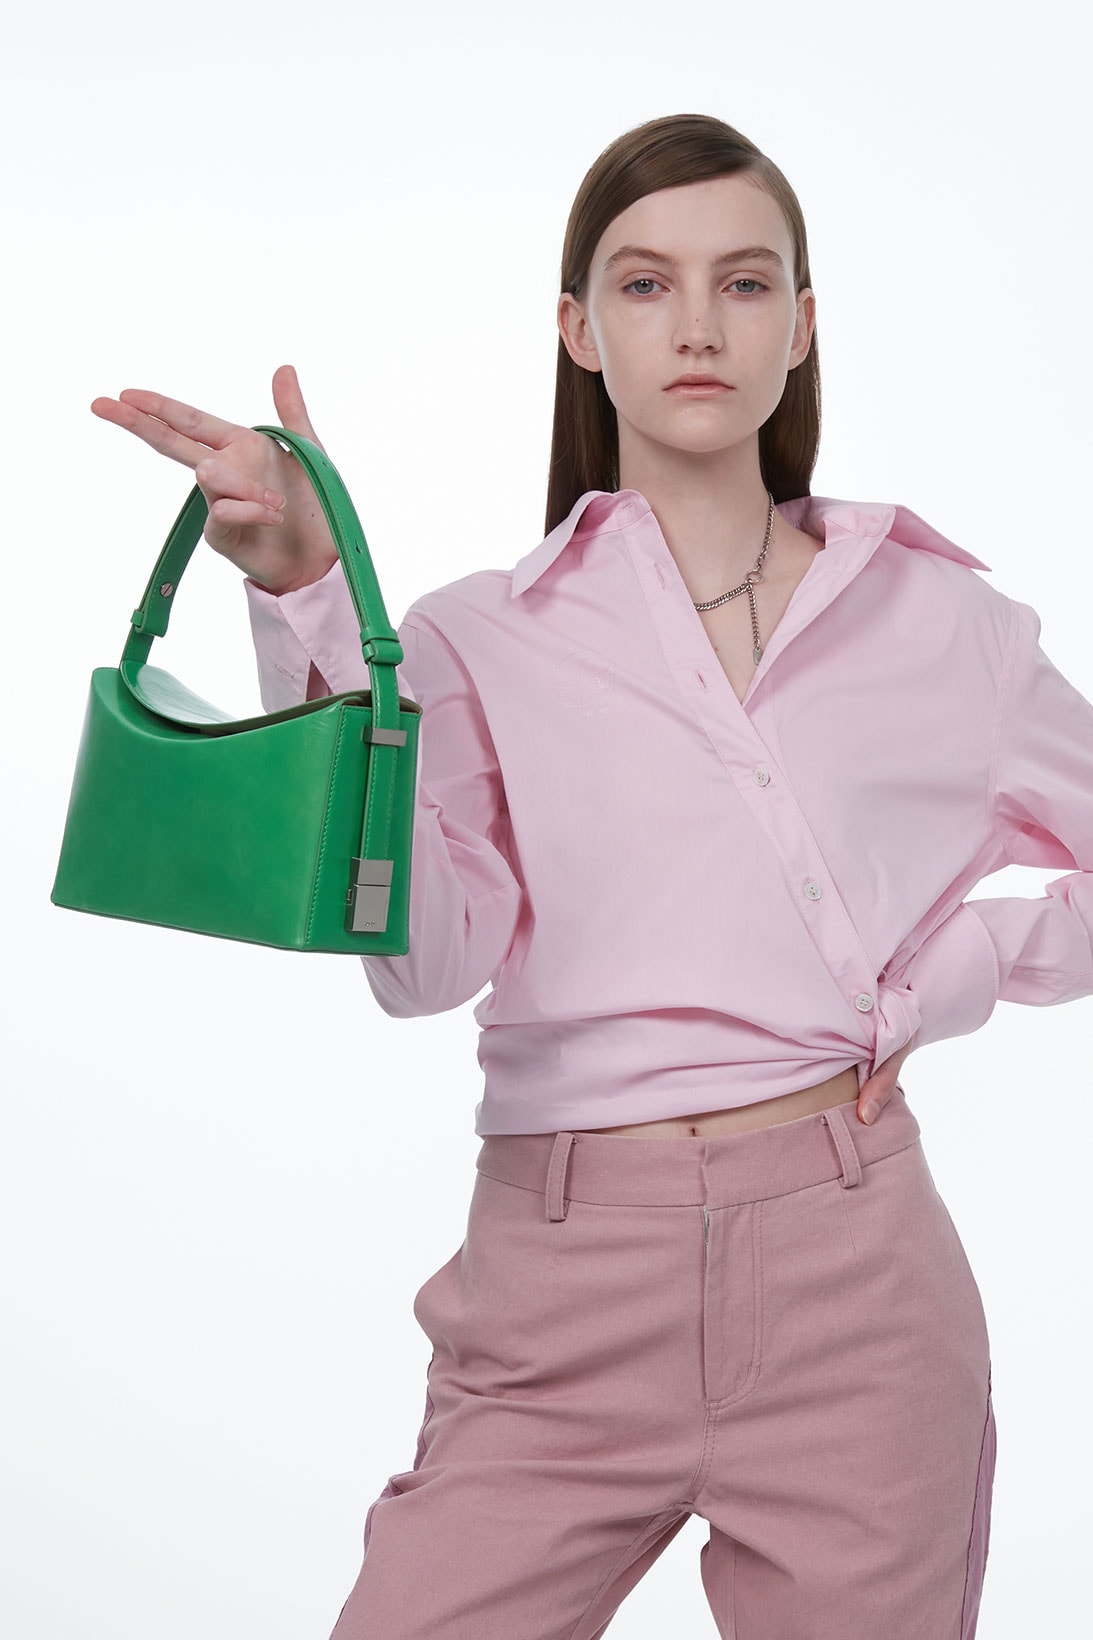 osoi spring summer ss21 collection campaign hustle and bustle handbags green pink jeans